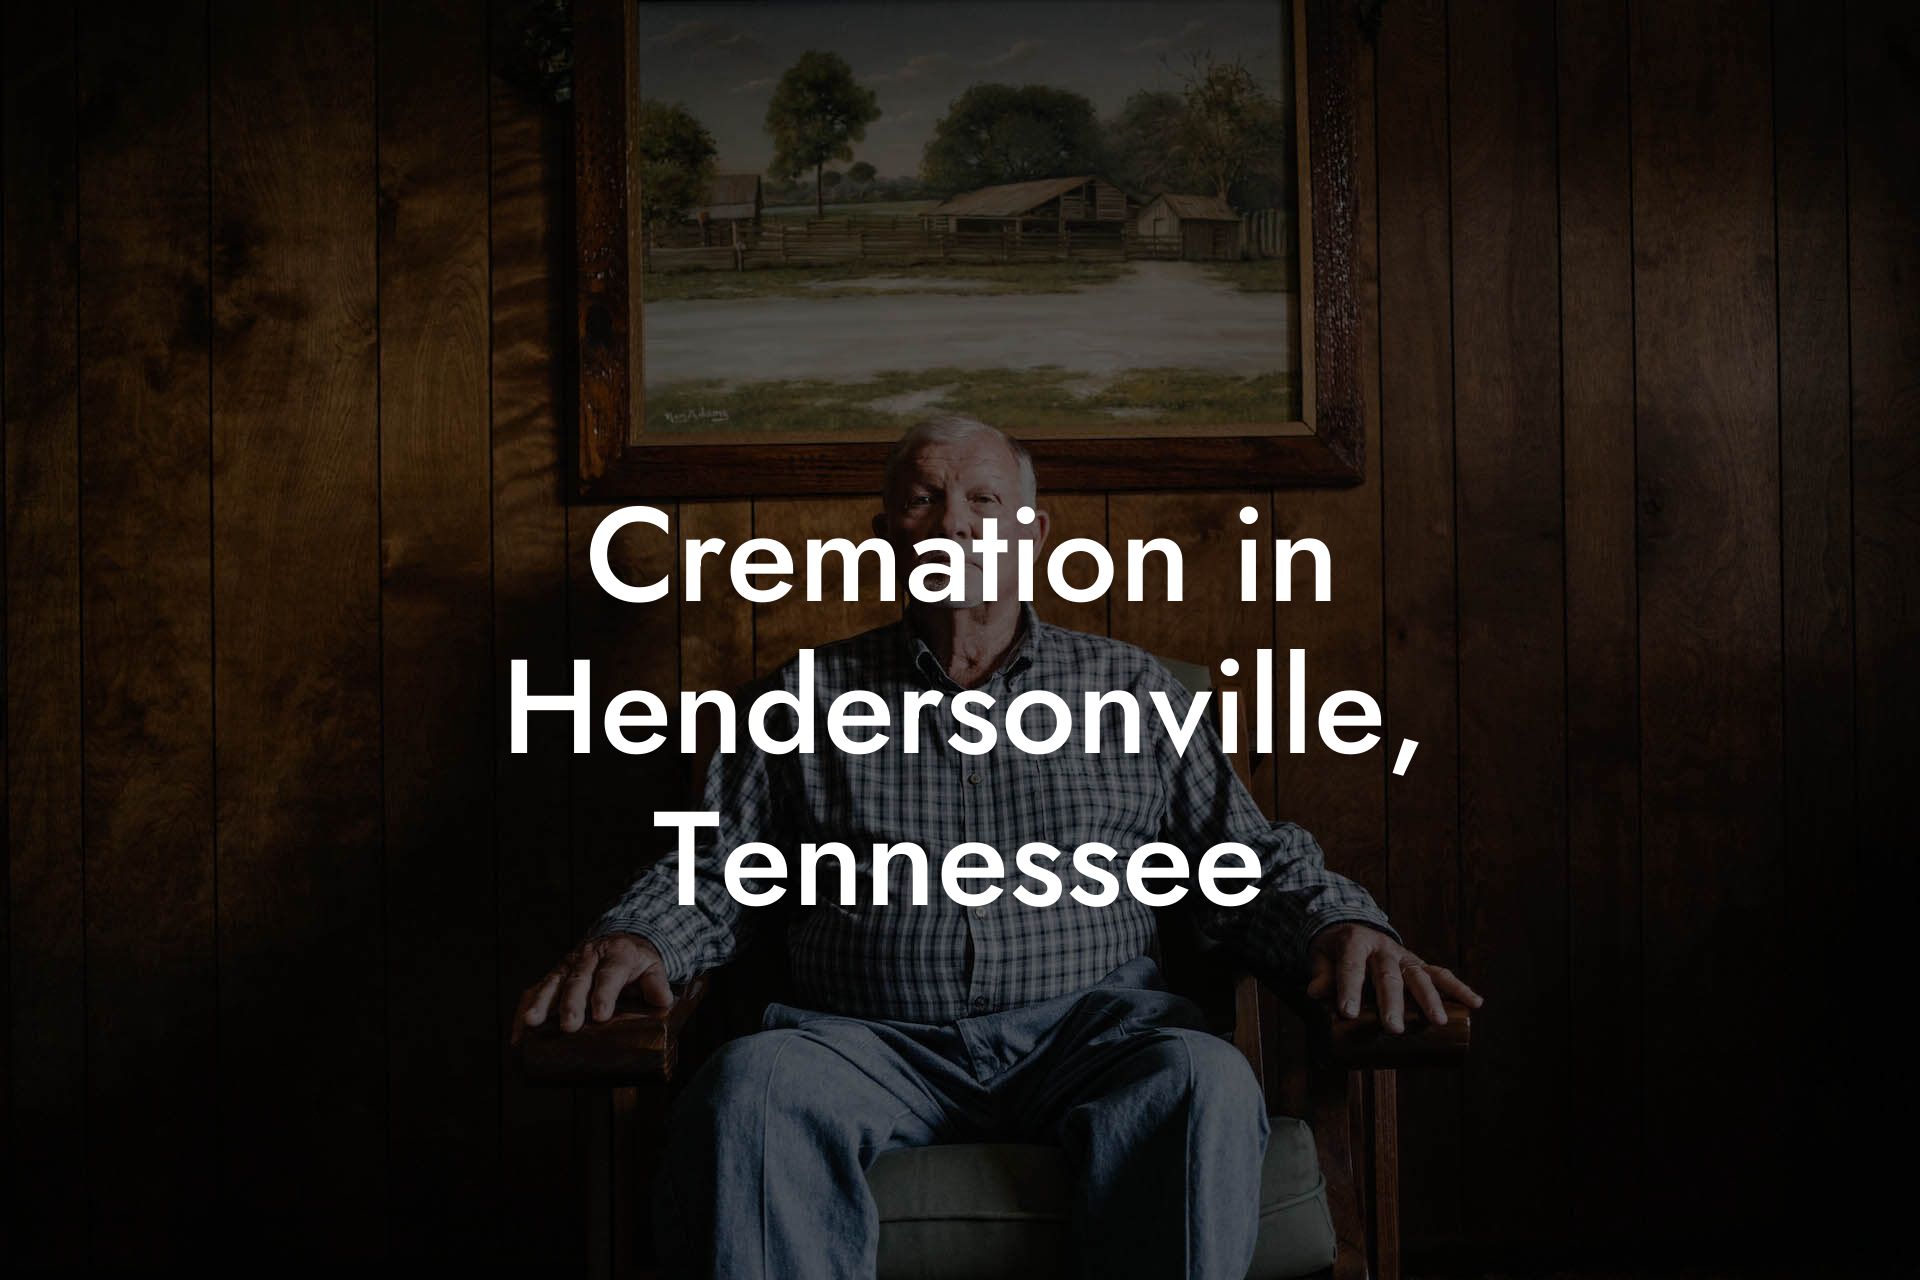 Cremation in Hendersonville, Tennessee